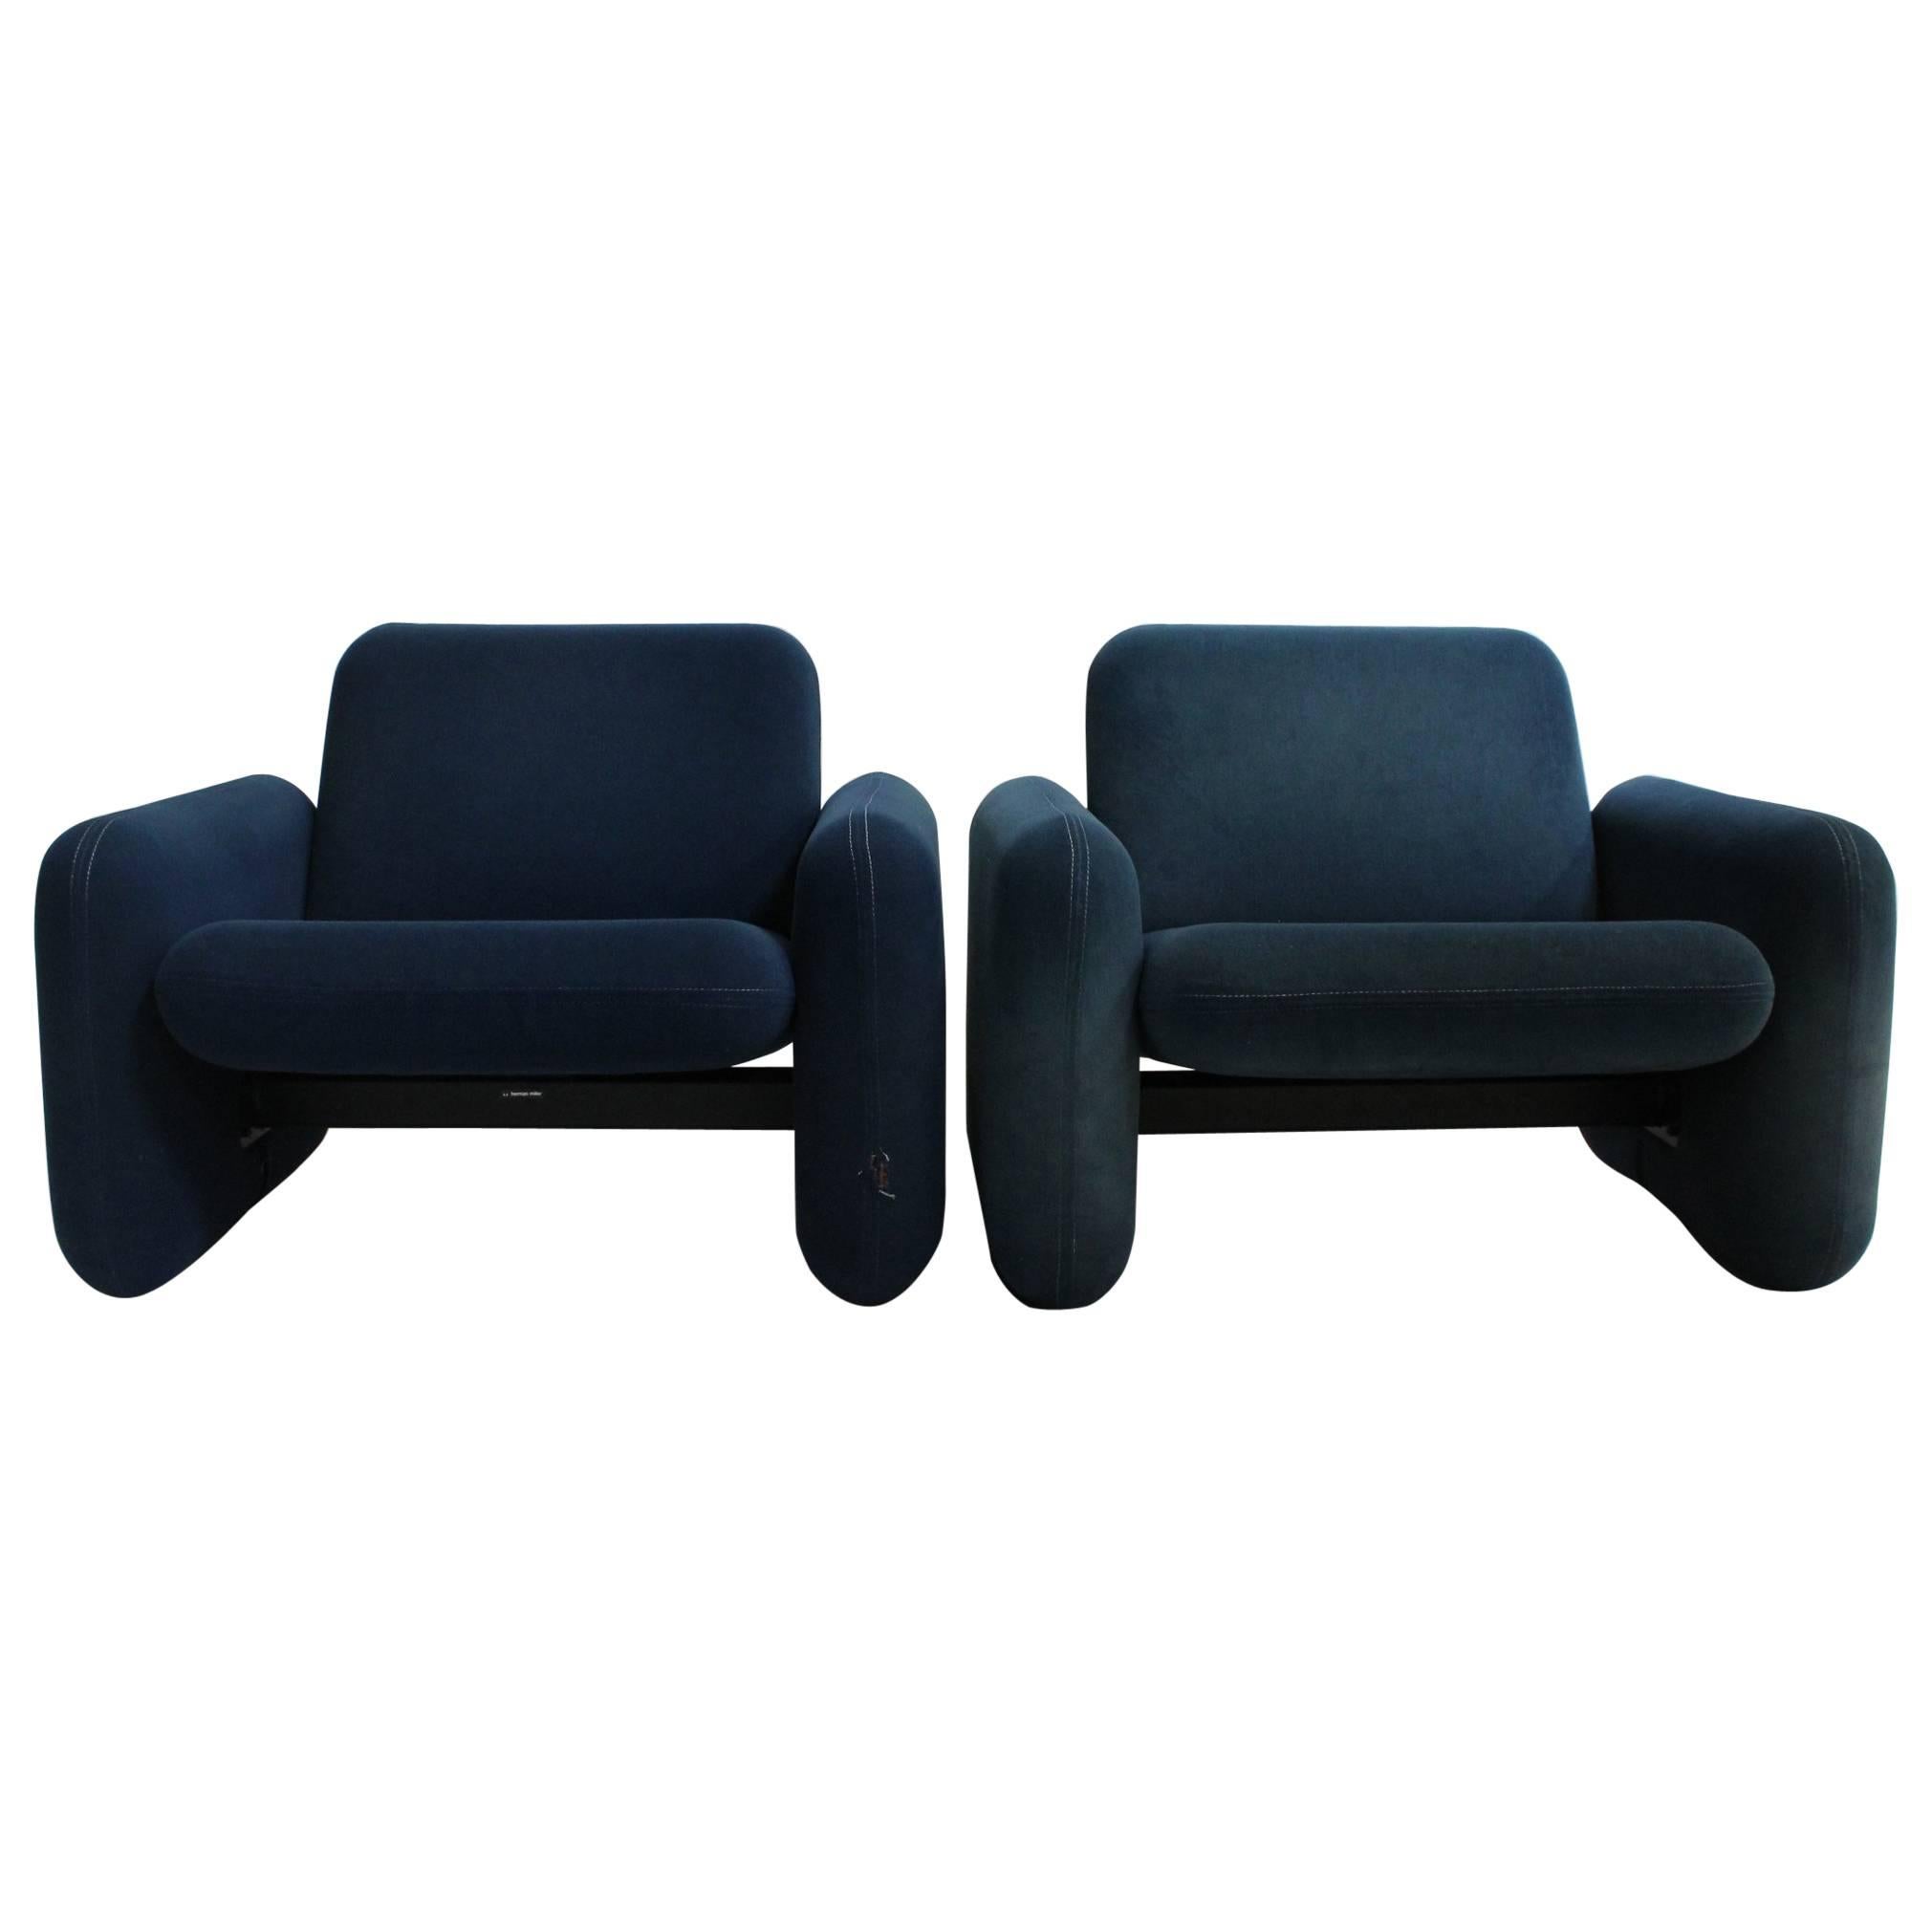 Ray Wilkes for Herman Miller Chiclet Chairs, a Pair For Sale